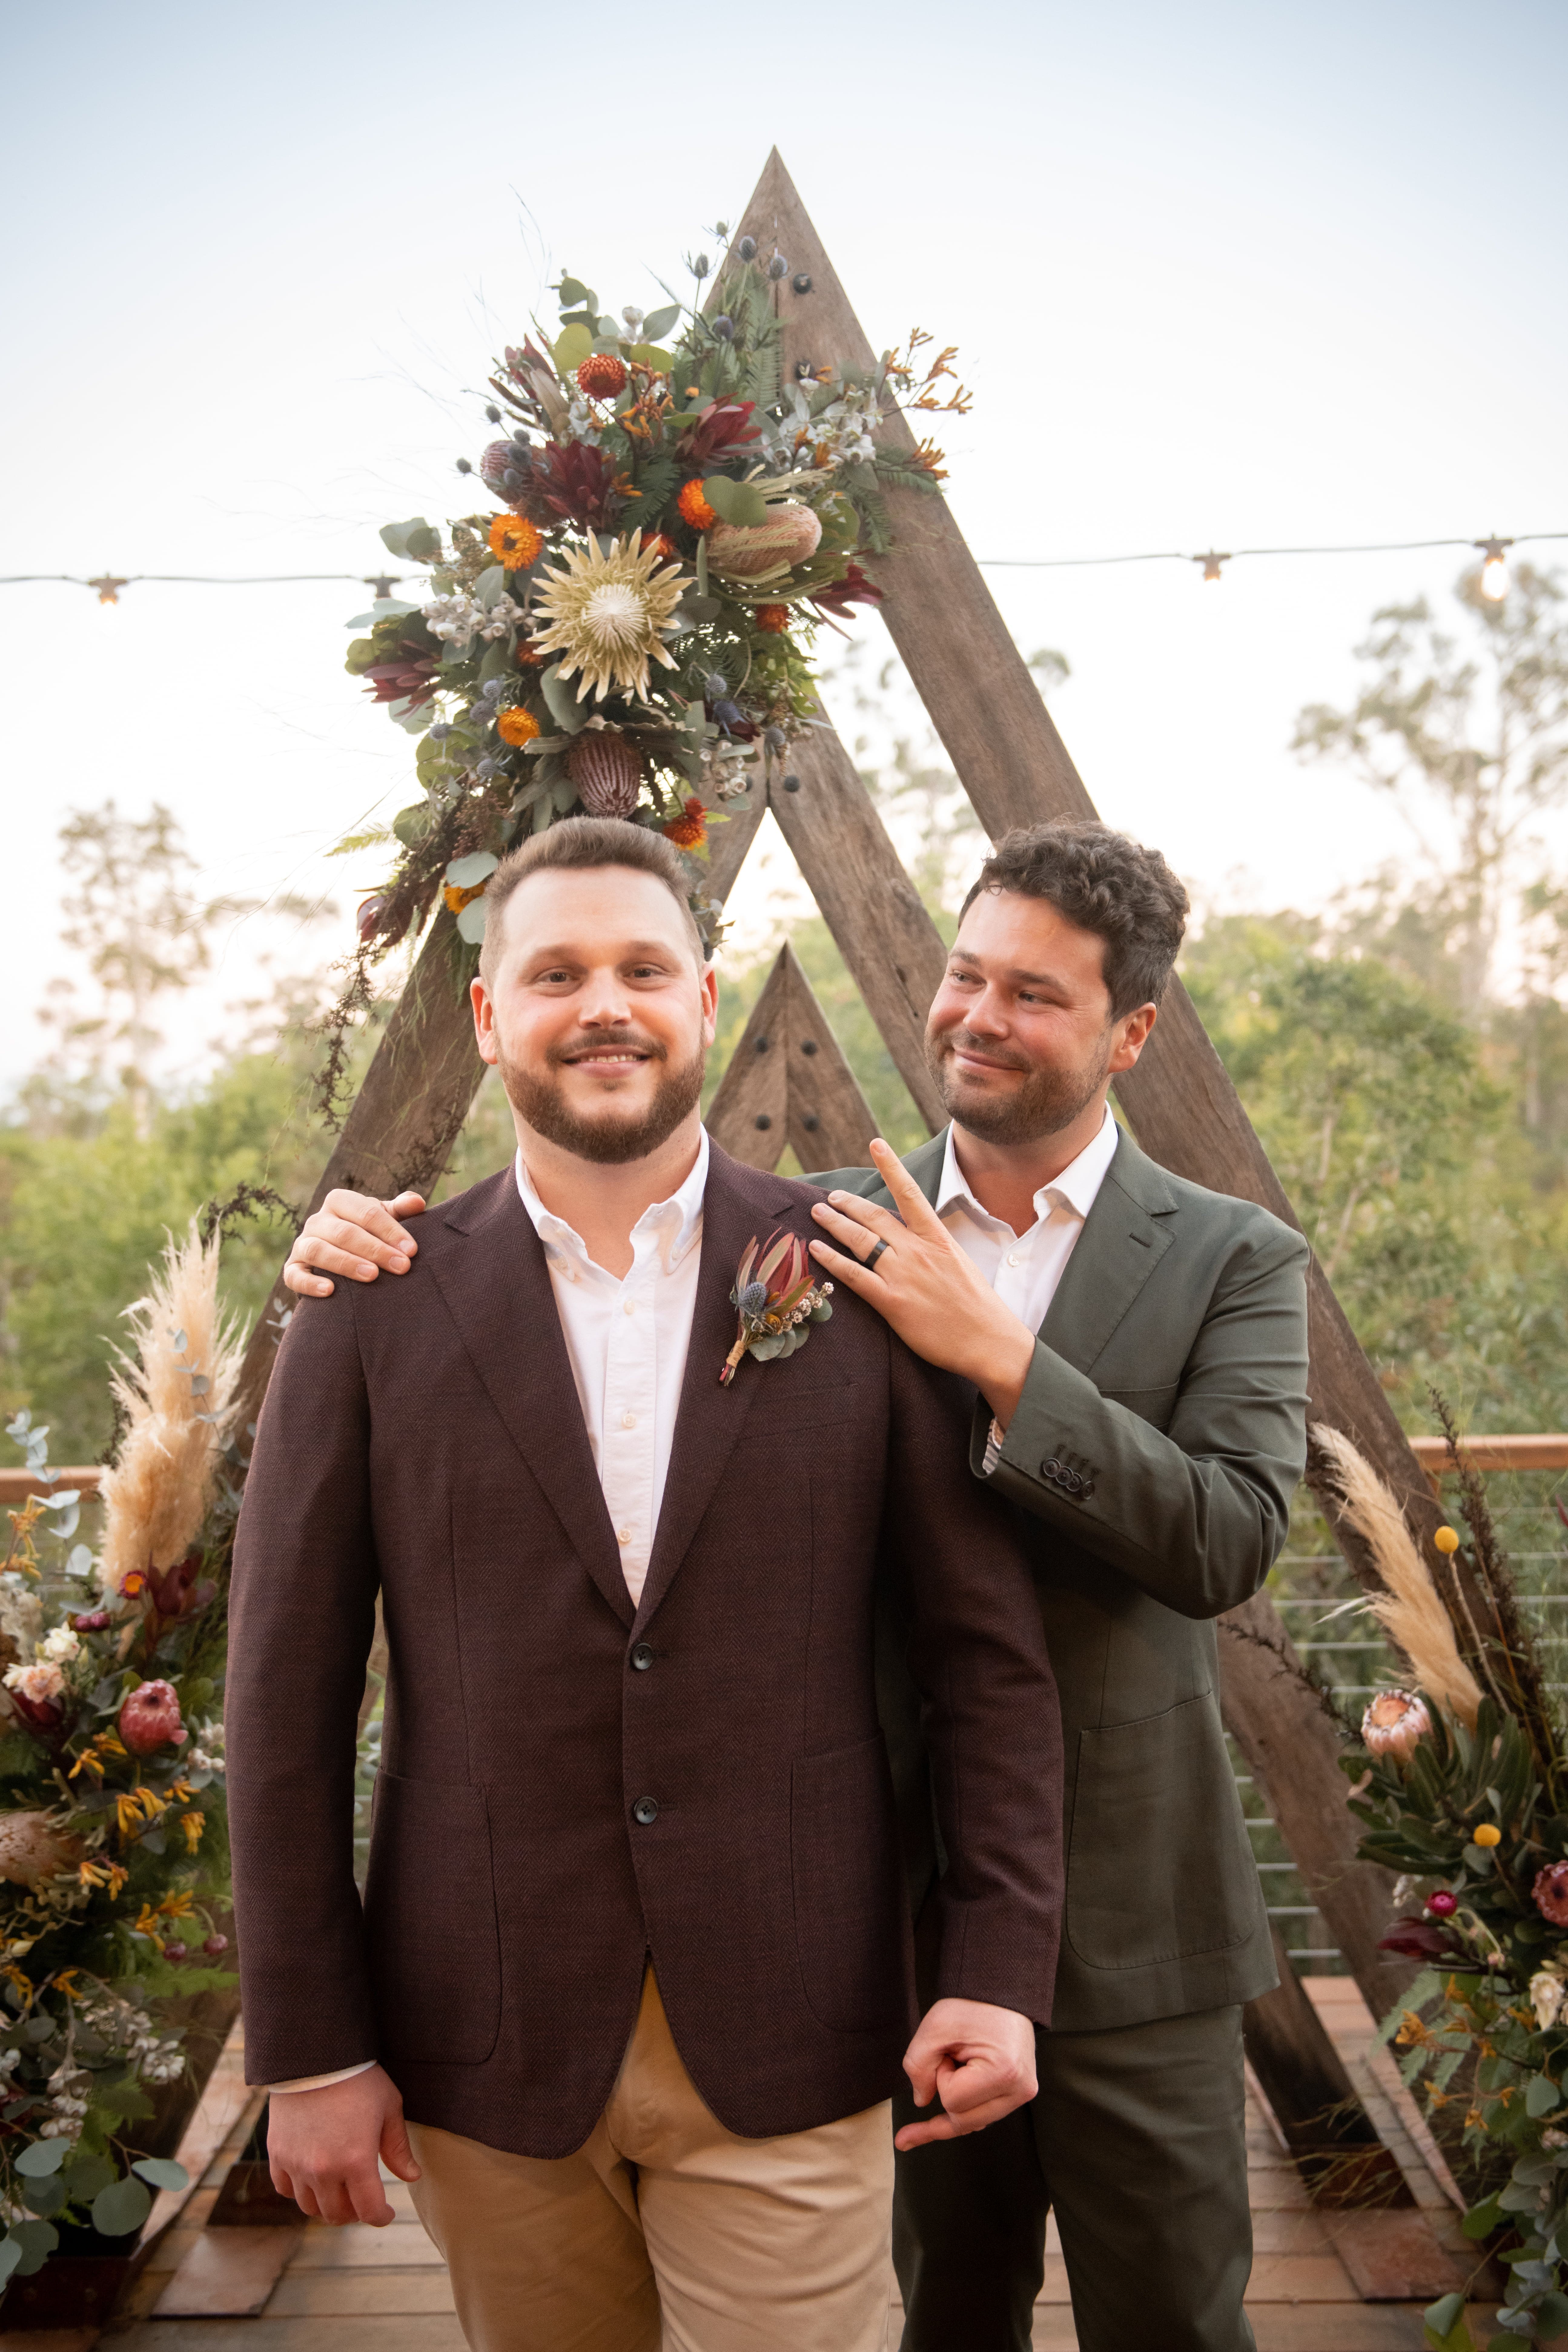 Real-wedding-Luke-and-Mitch-at-The-Crocodile-Lodge-Australia-Zoo-Queensland-newlywedded-couple-portrait-with-wedding-arch-on-the-background